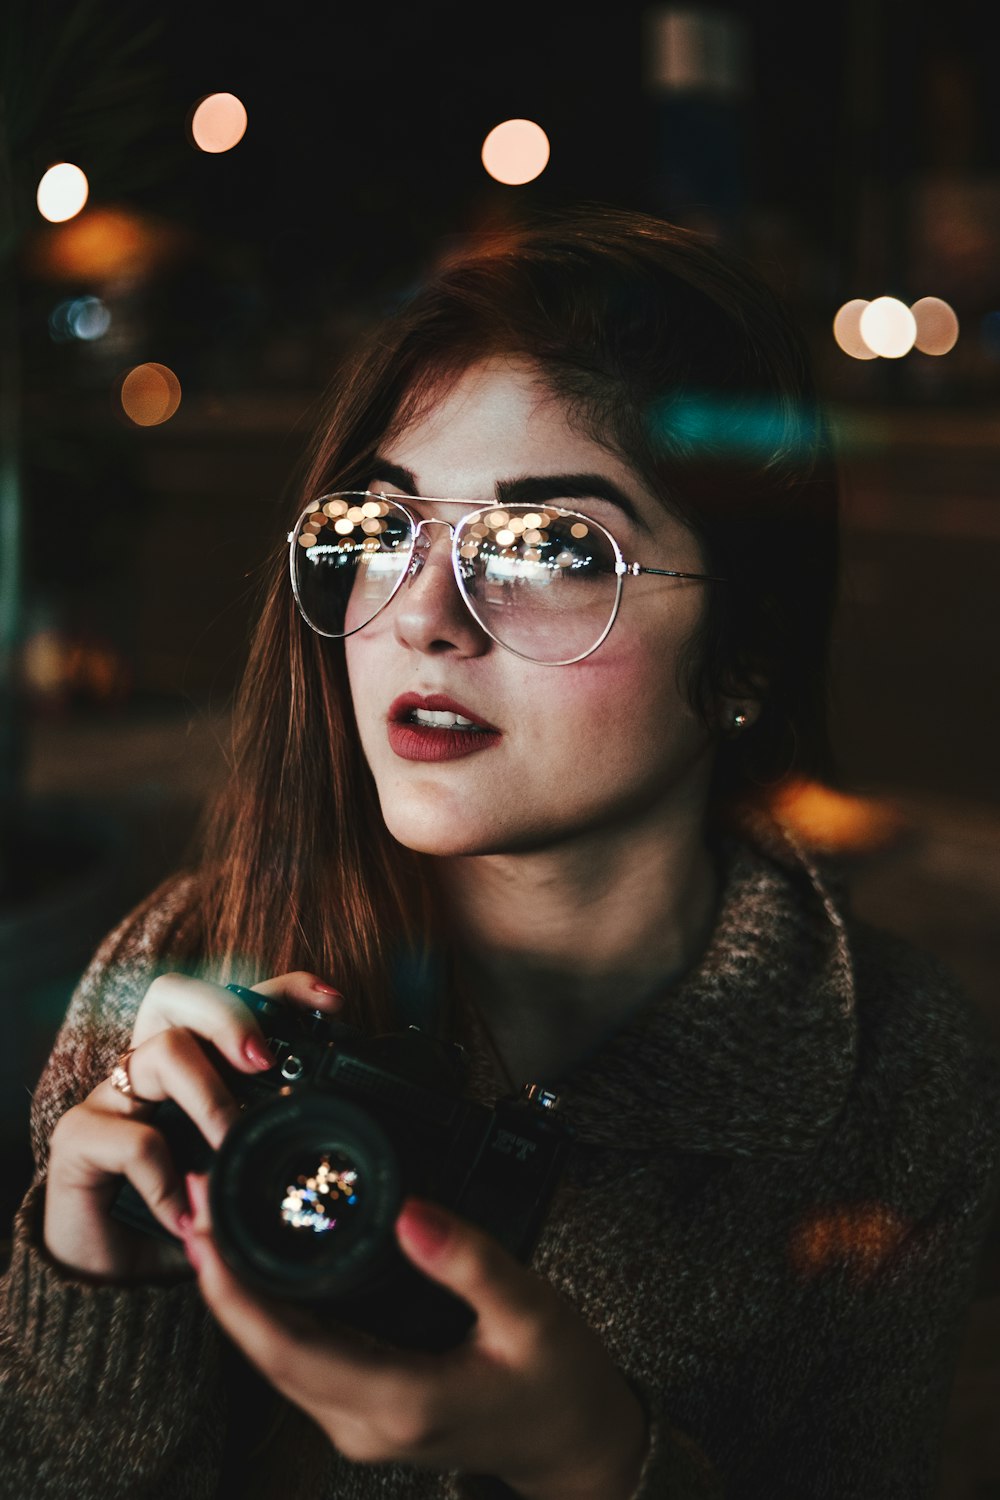 woman wearing silver-colored Aviator-style sunglasses holding camera bokeh photography